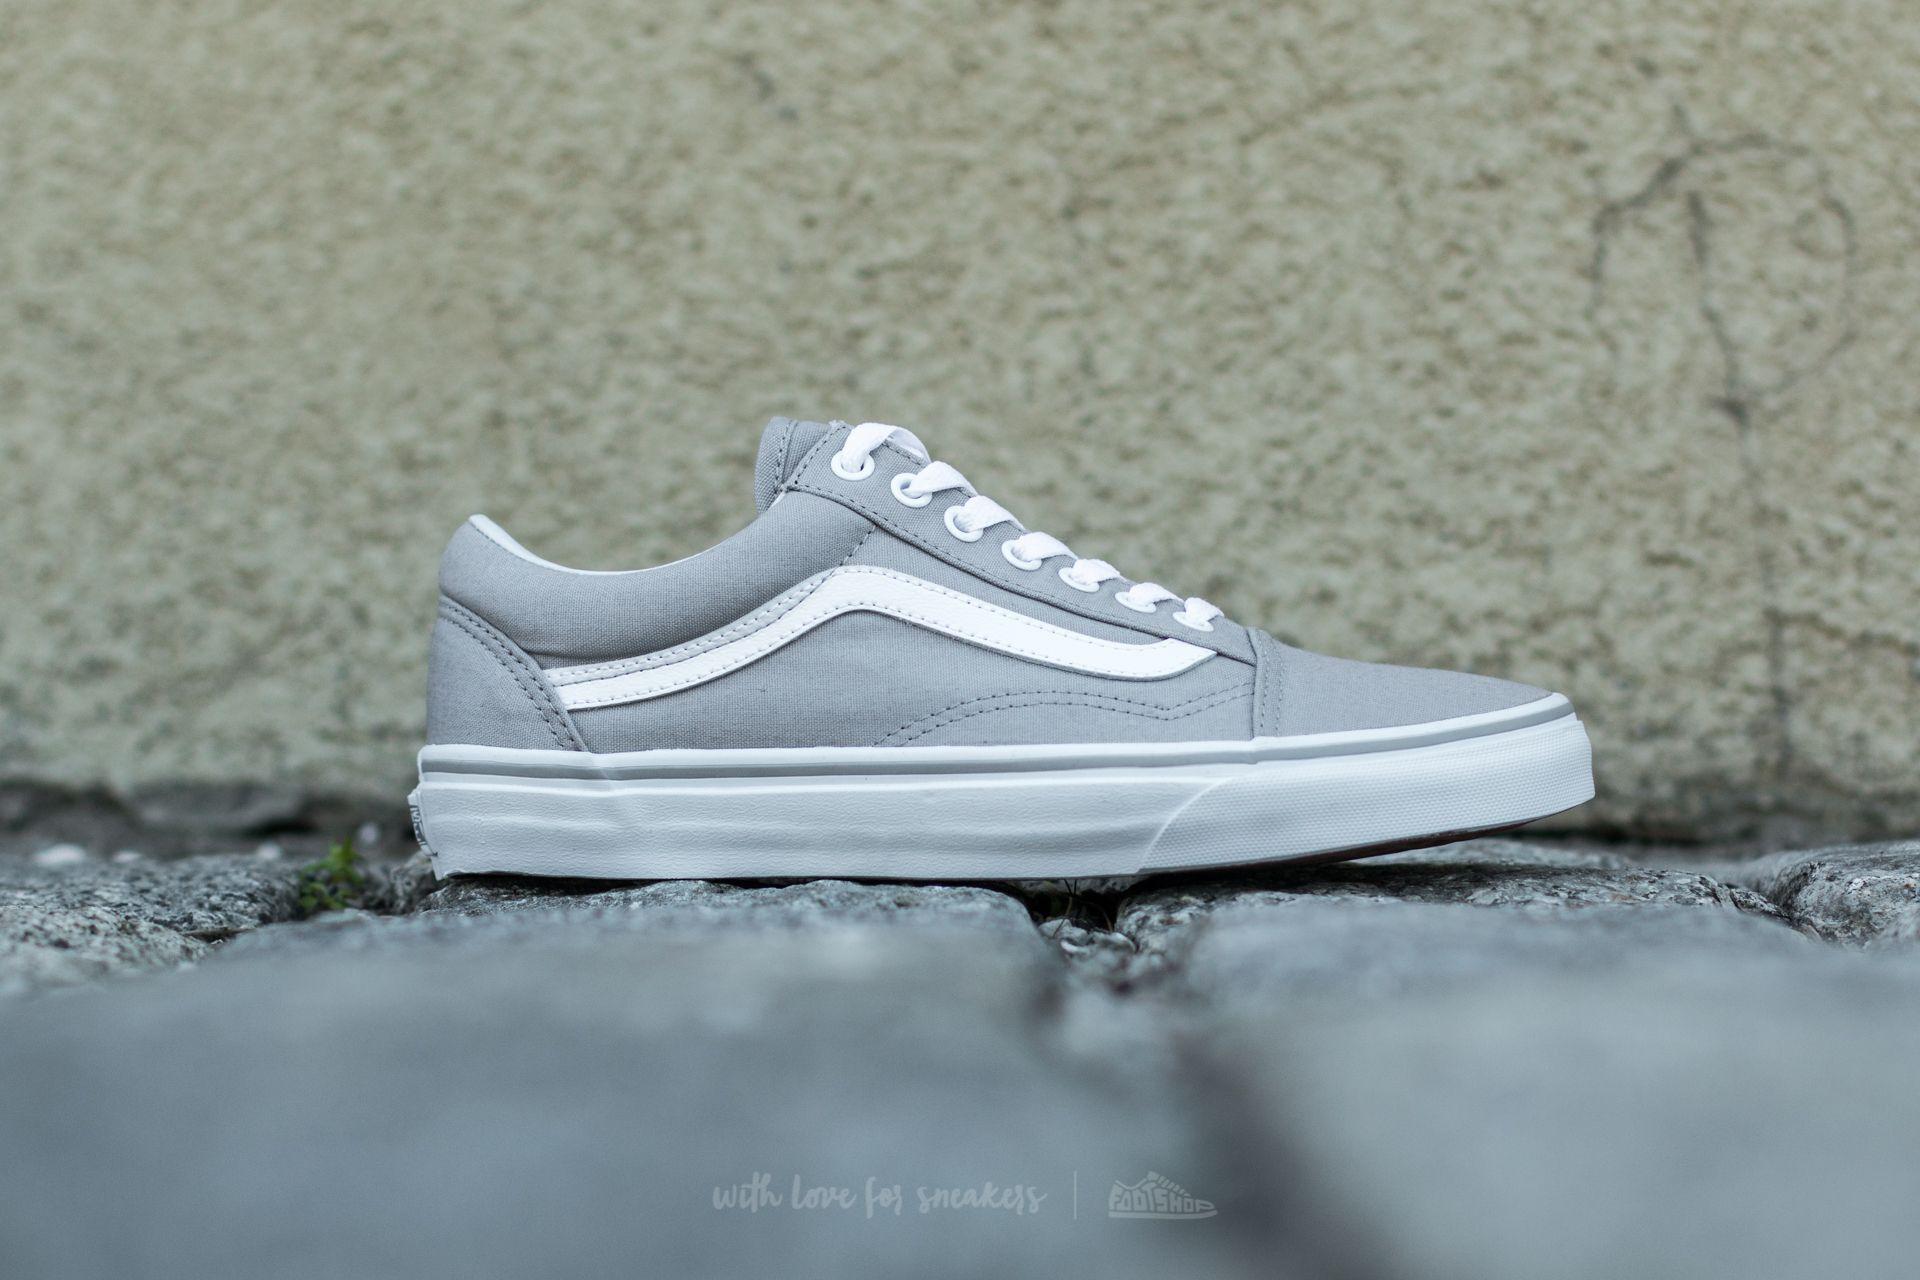 Vans Canvas Old Skool Drizzle Drizzle/ True White - Lyst